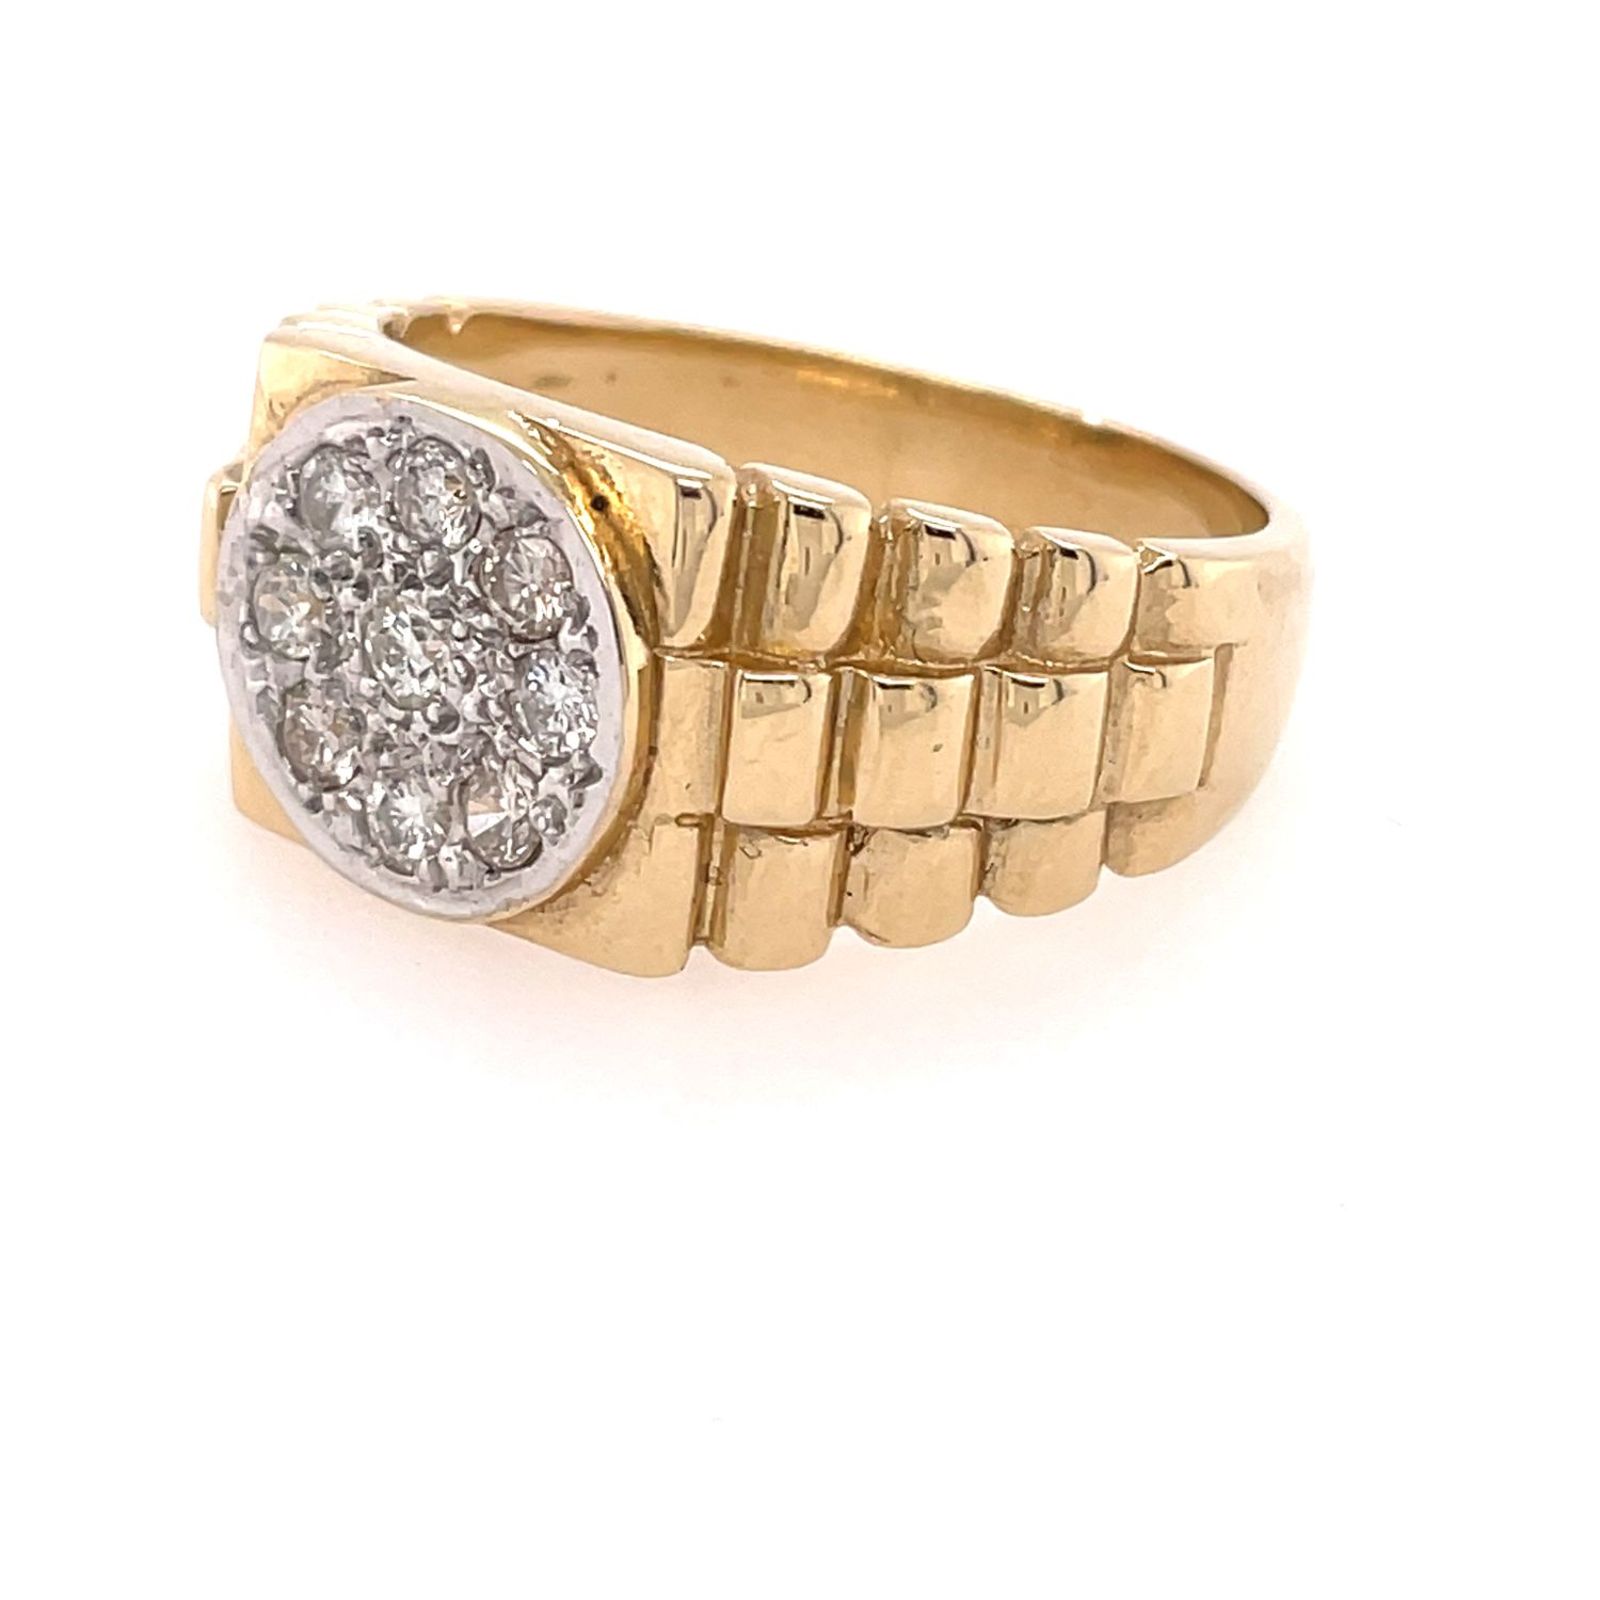 Rolex Style Diamond Signet Ring, 9ct 72pts | Smiths the Jewellers Lincoln